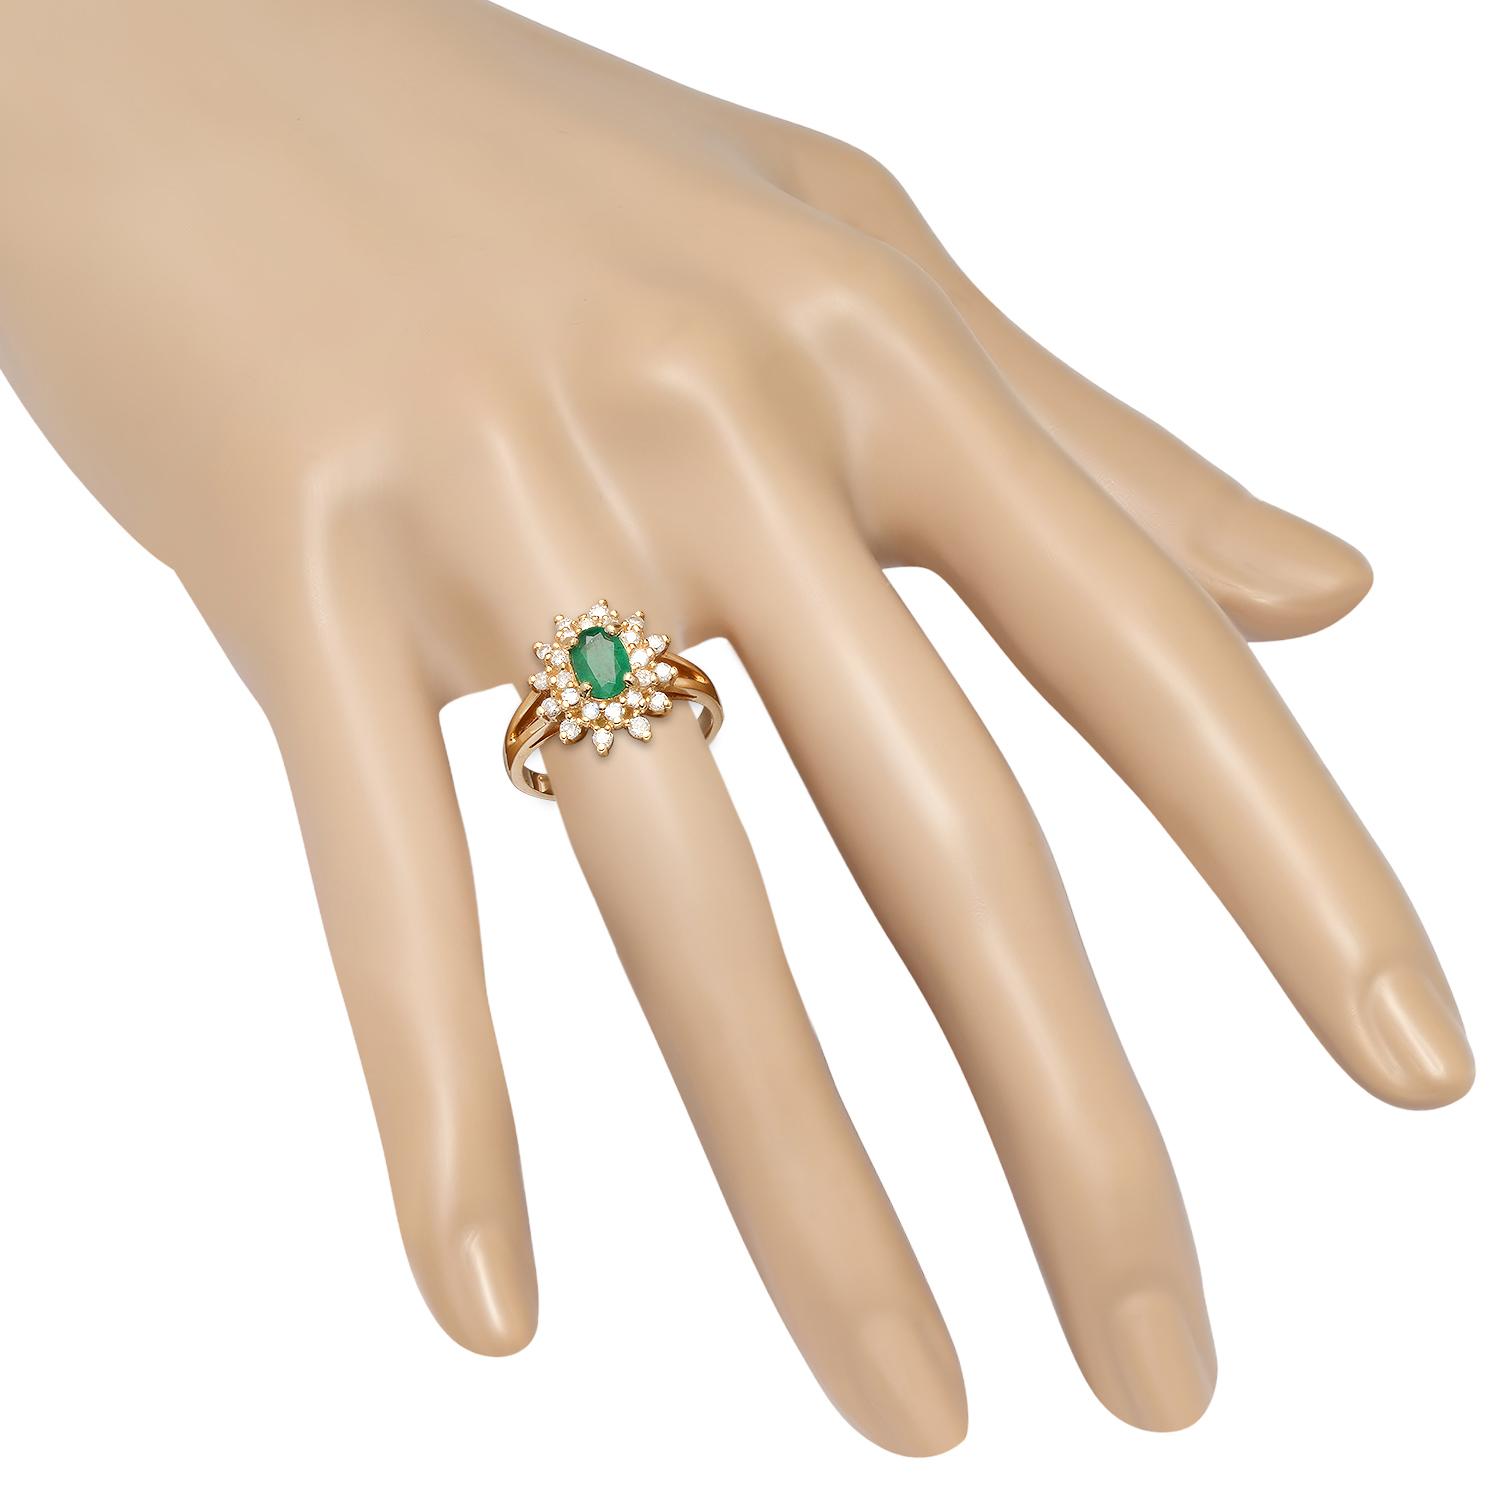 14K Yellow Gold Setting with 0.65ct Emerald and 0.30ct Diamond Ring